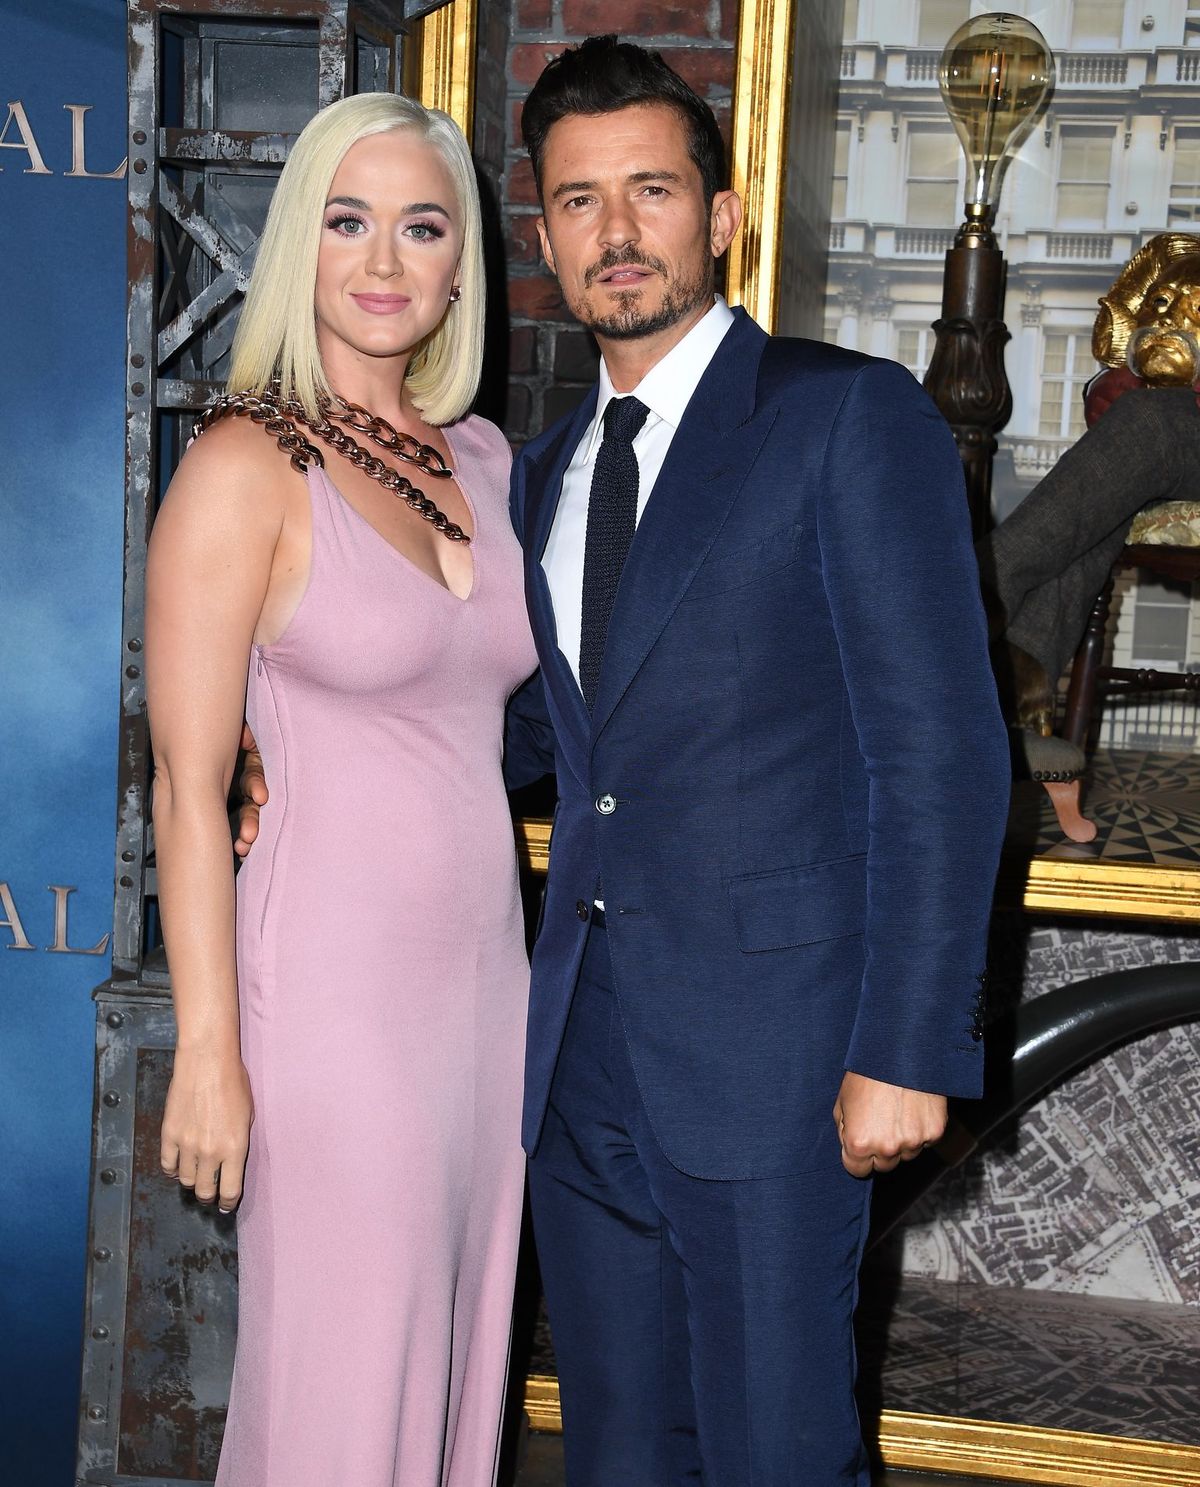 Katy Perry and Orlando Bloom at the Los Angeles premiere of "Carnival Row" on August 21, 2019. | Photo: Getty Images